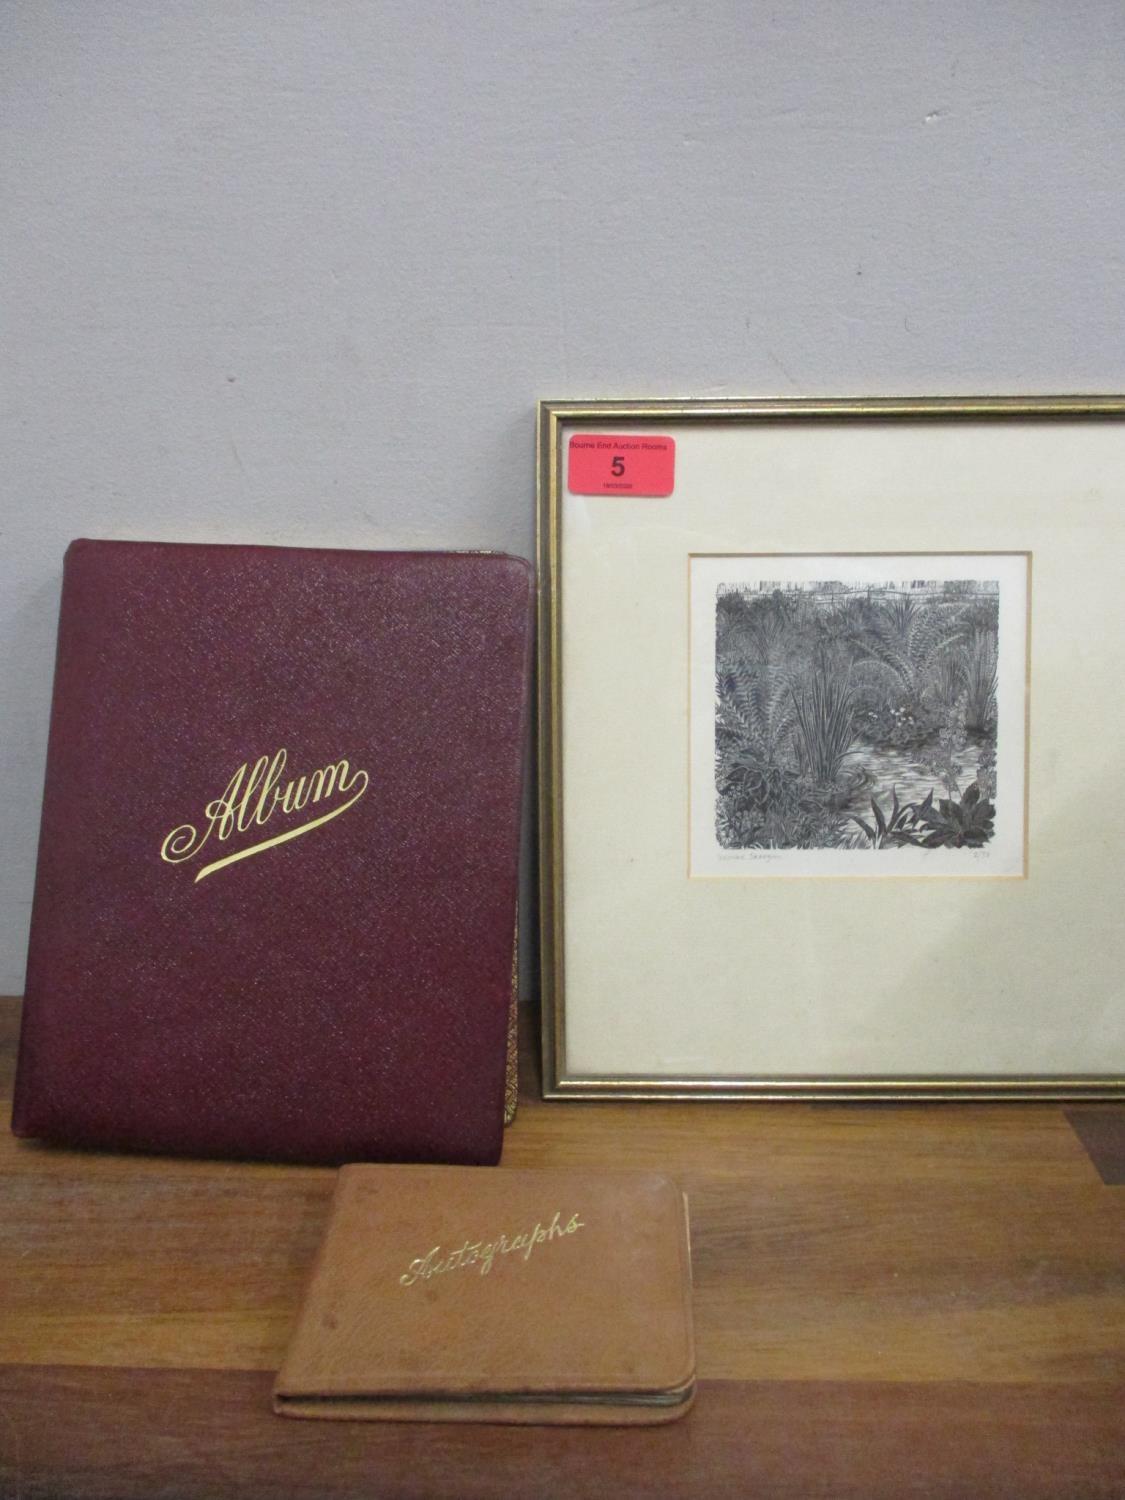 An autograph book, mid 20th century containing Enid Blyton's signature and various Olympians, - Image 6 of 6